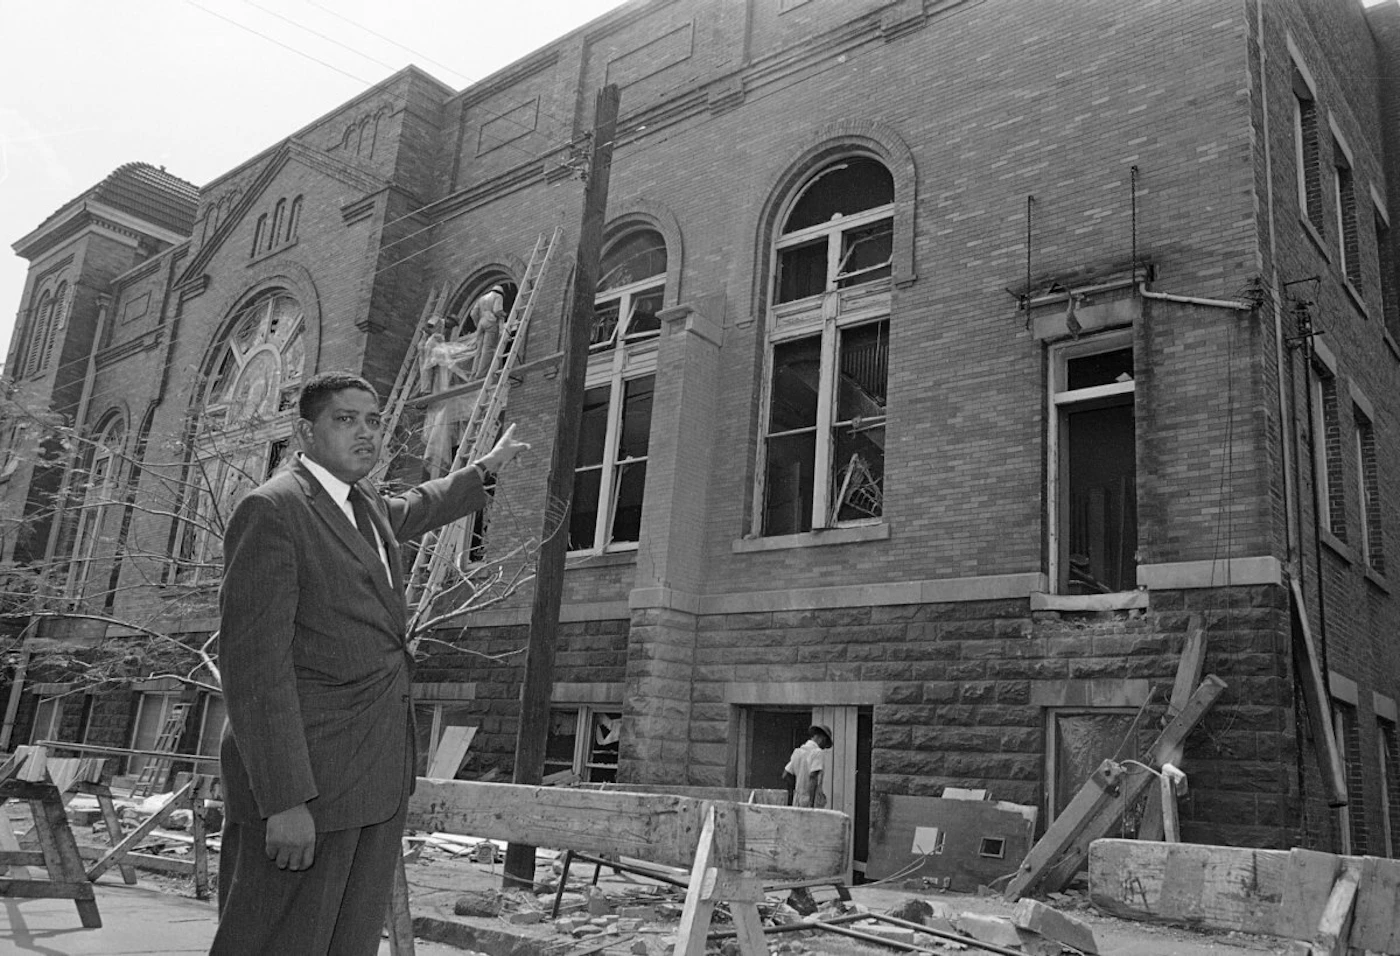 Numerous bomb threats against historically Black colleges across the nation evoke memories of racist violence, like the 1963 bombing of a Birmingham, Alabama church that killed four young girls and injured many others. (AP Photo)